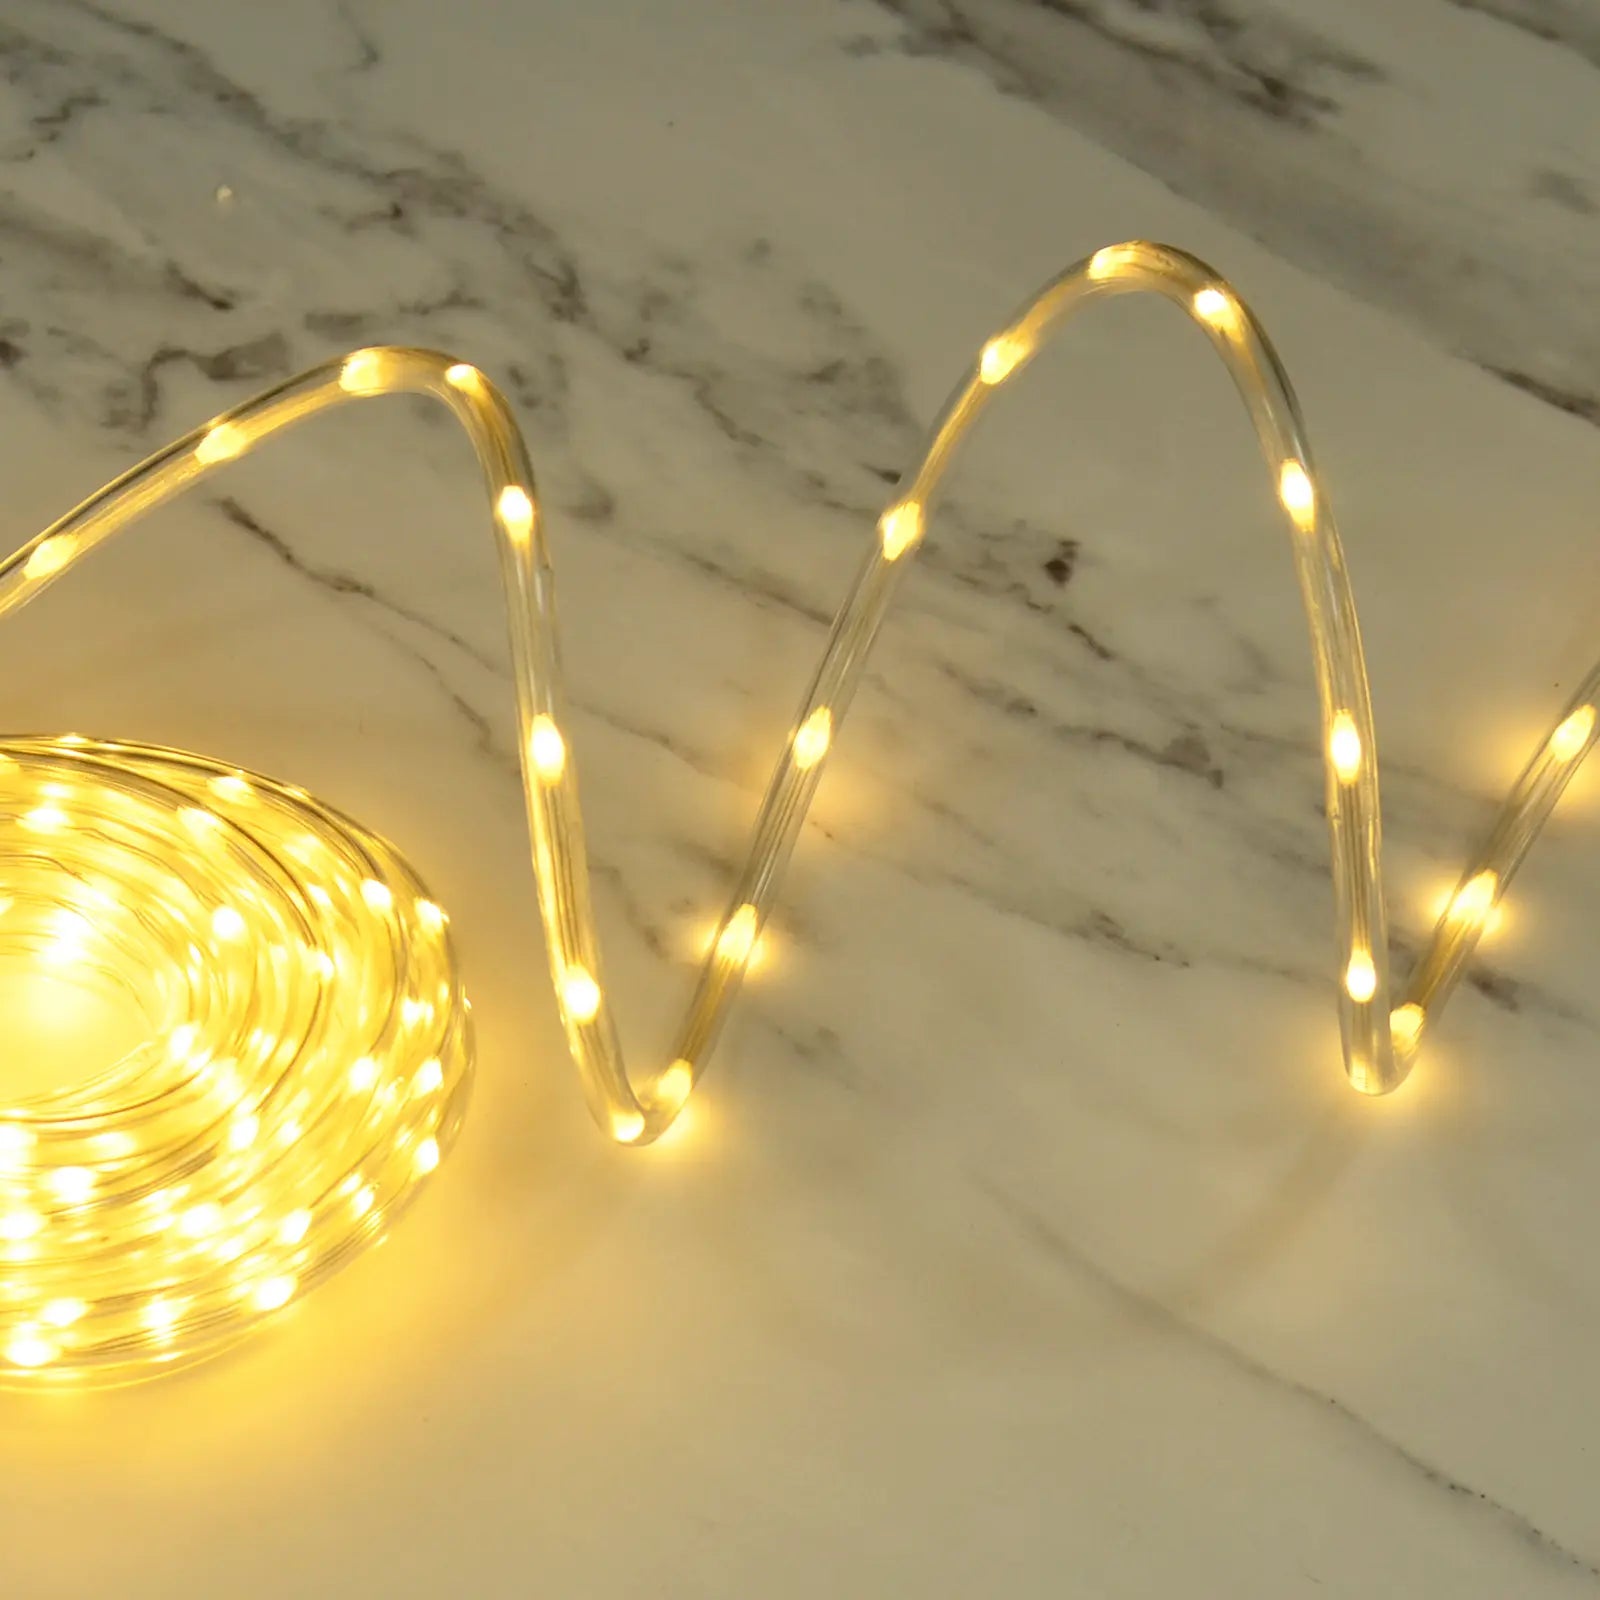 Warm white LED rope light for decorating home and garden